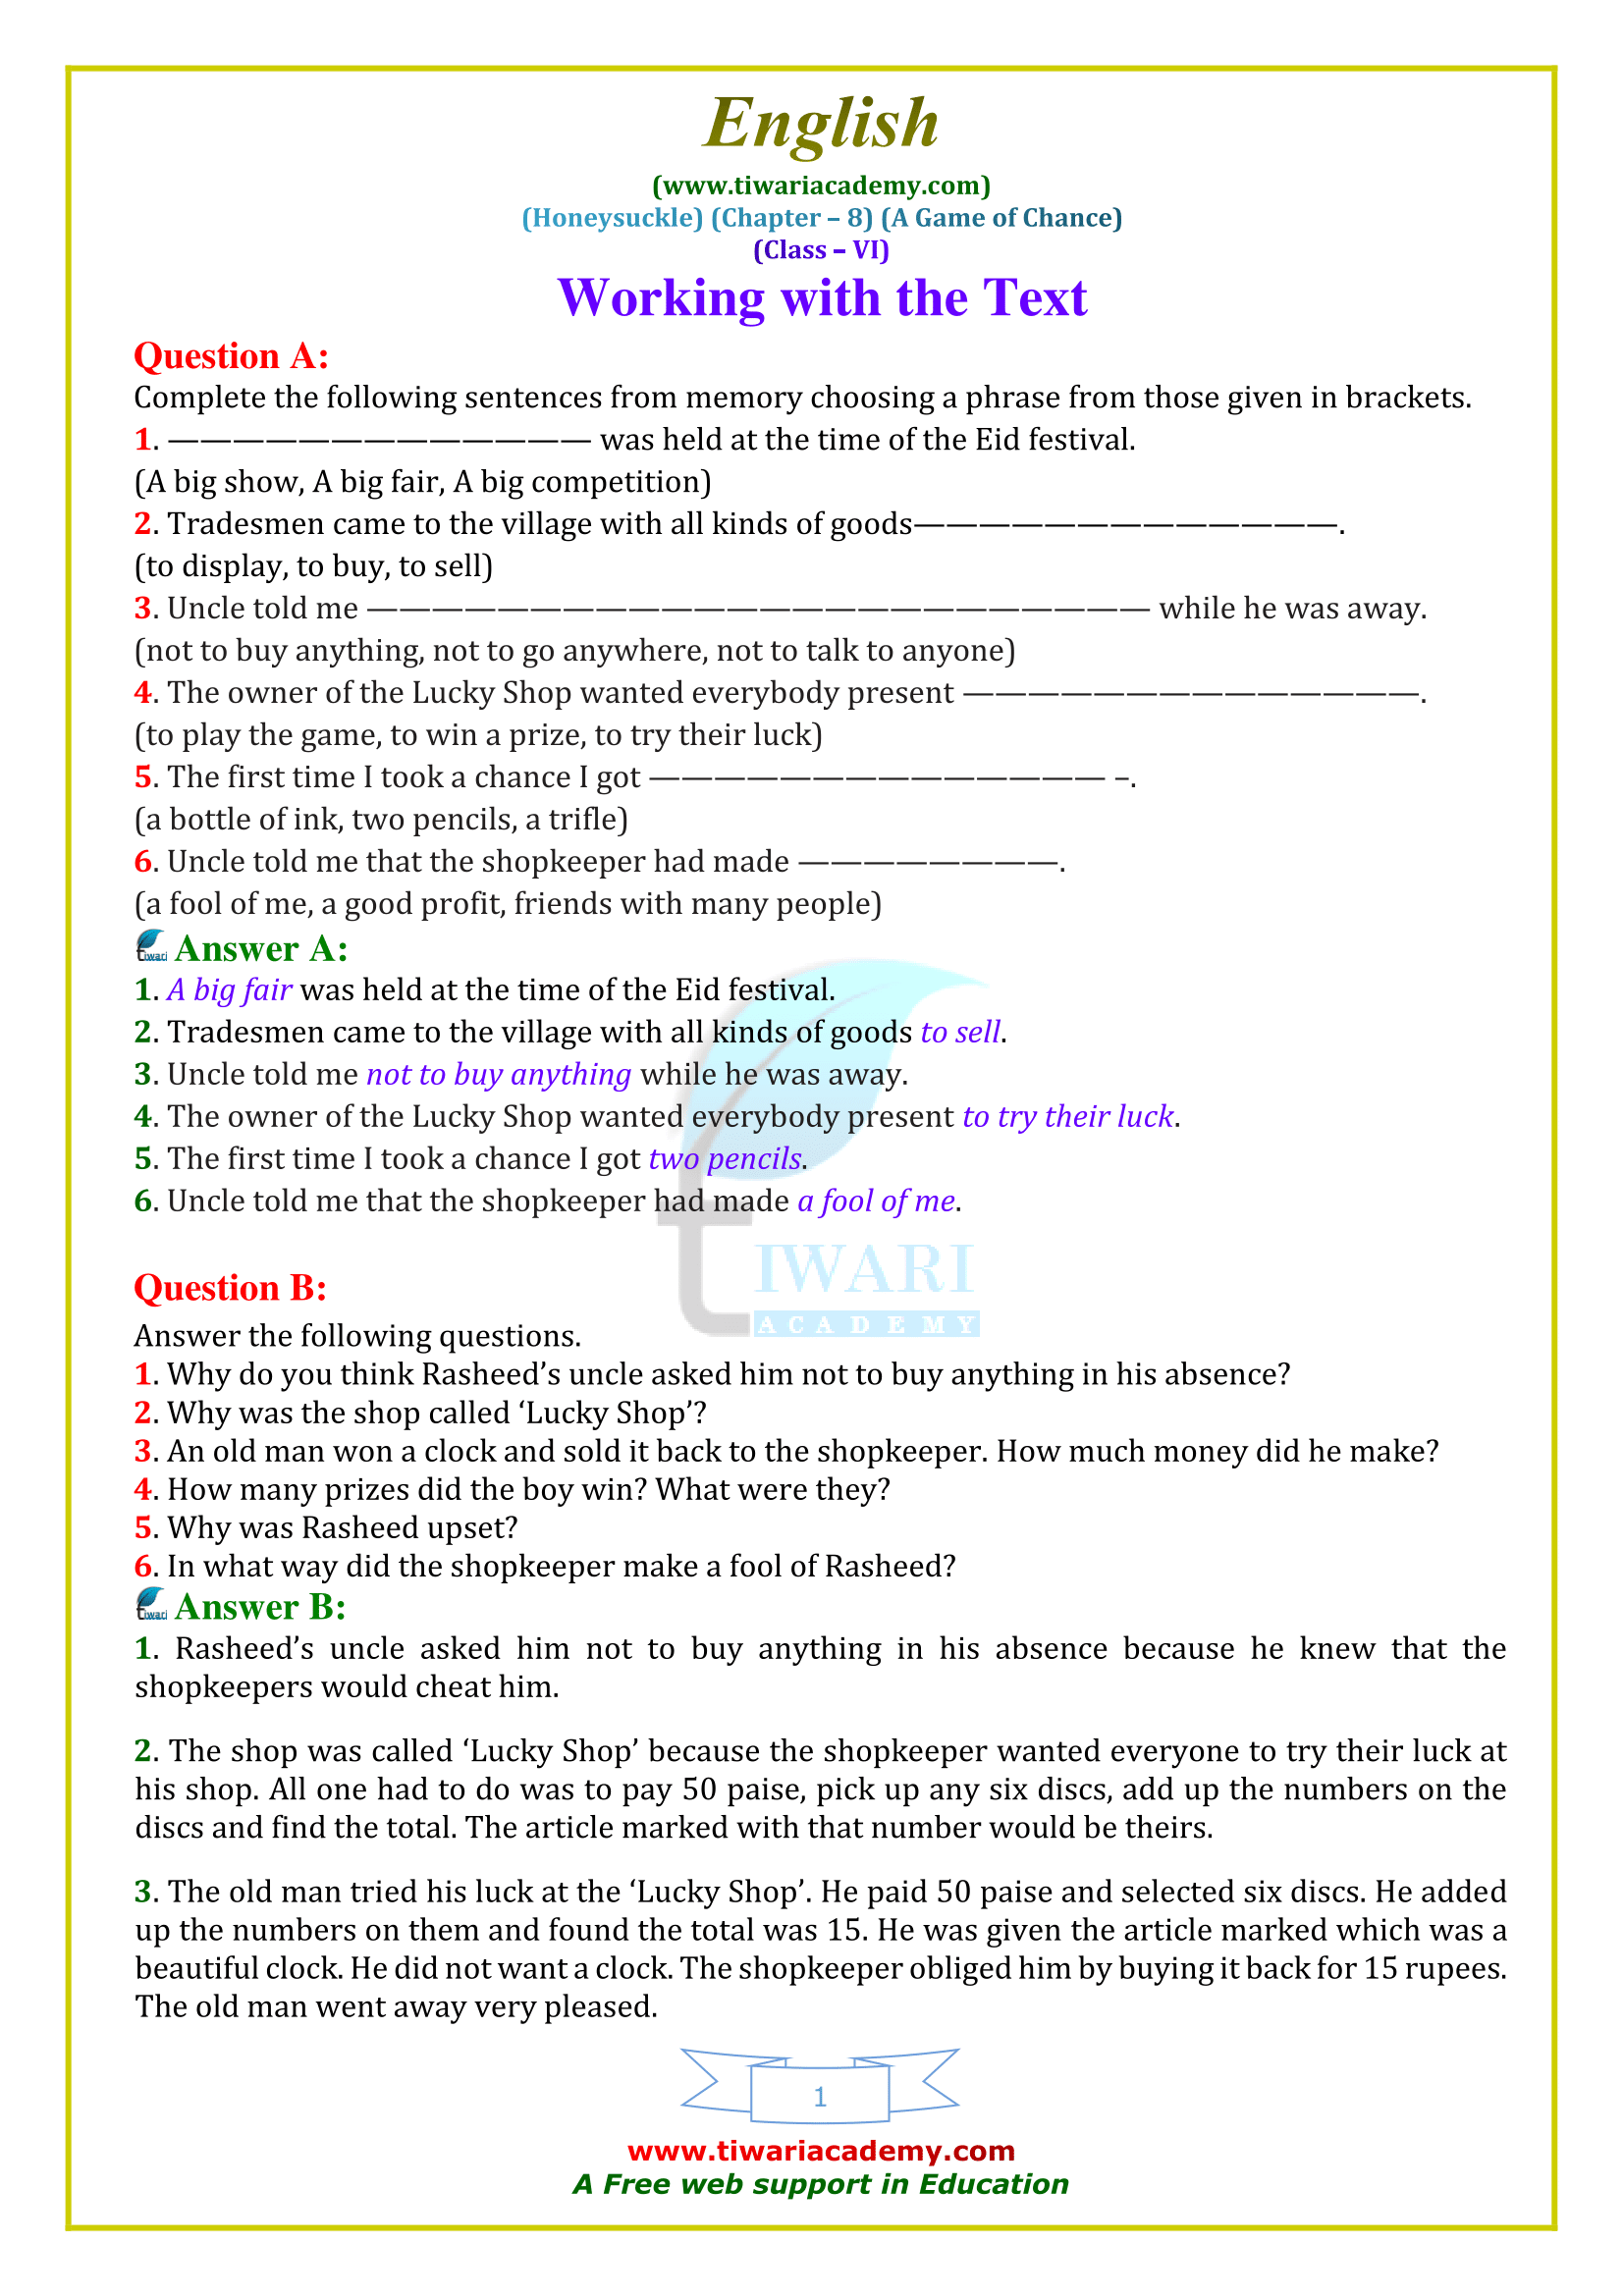 NCERT Solutions for Class 6 English Honeysuckle Chapter 8 A Game of Chance